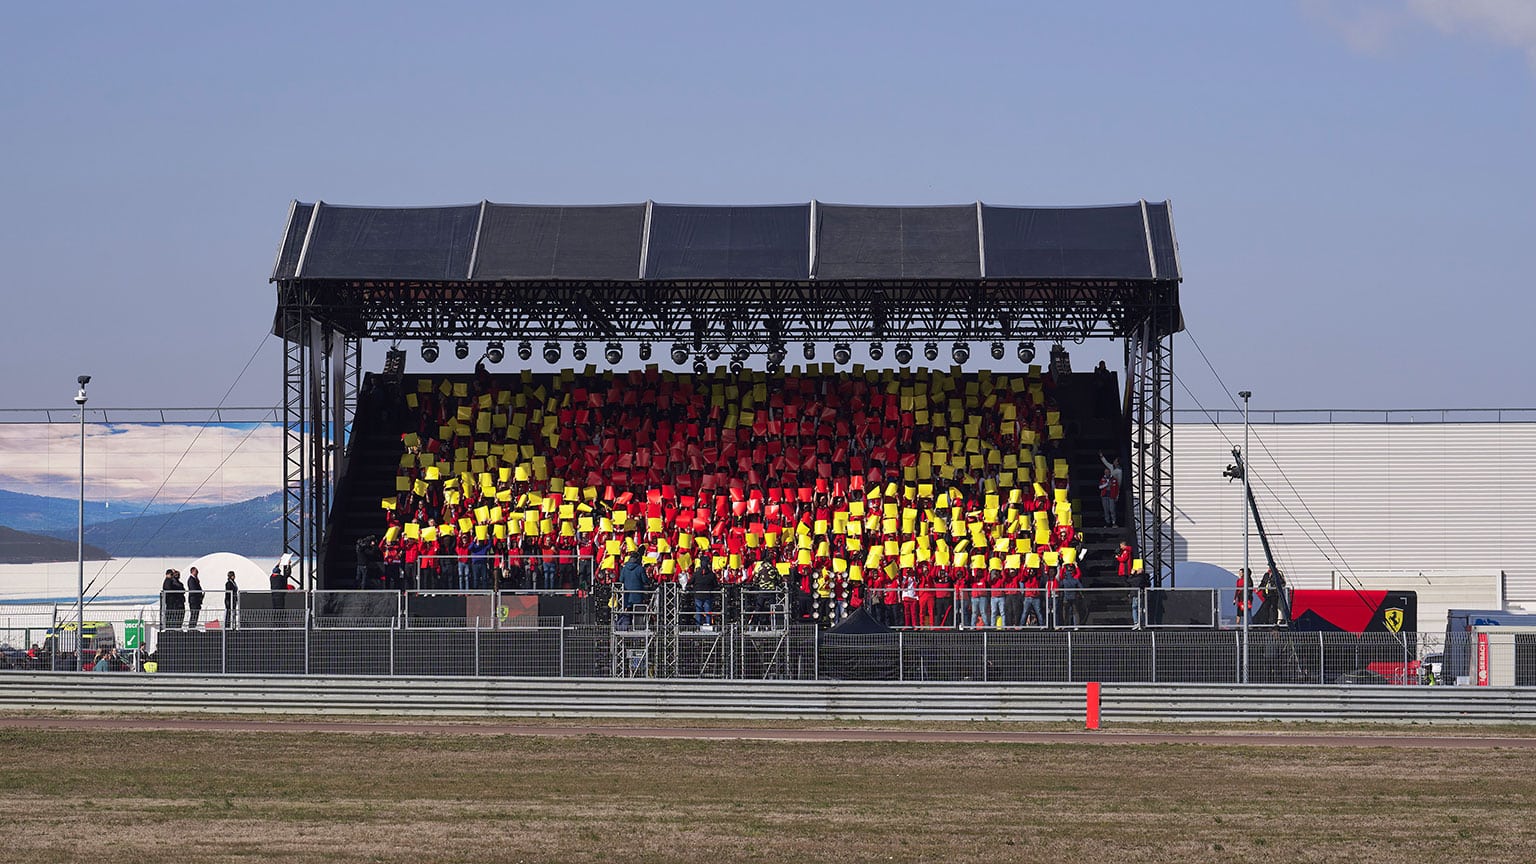 The new Ferrari drives past a packed grandstand on its launch day